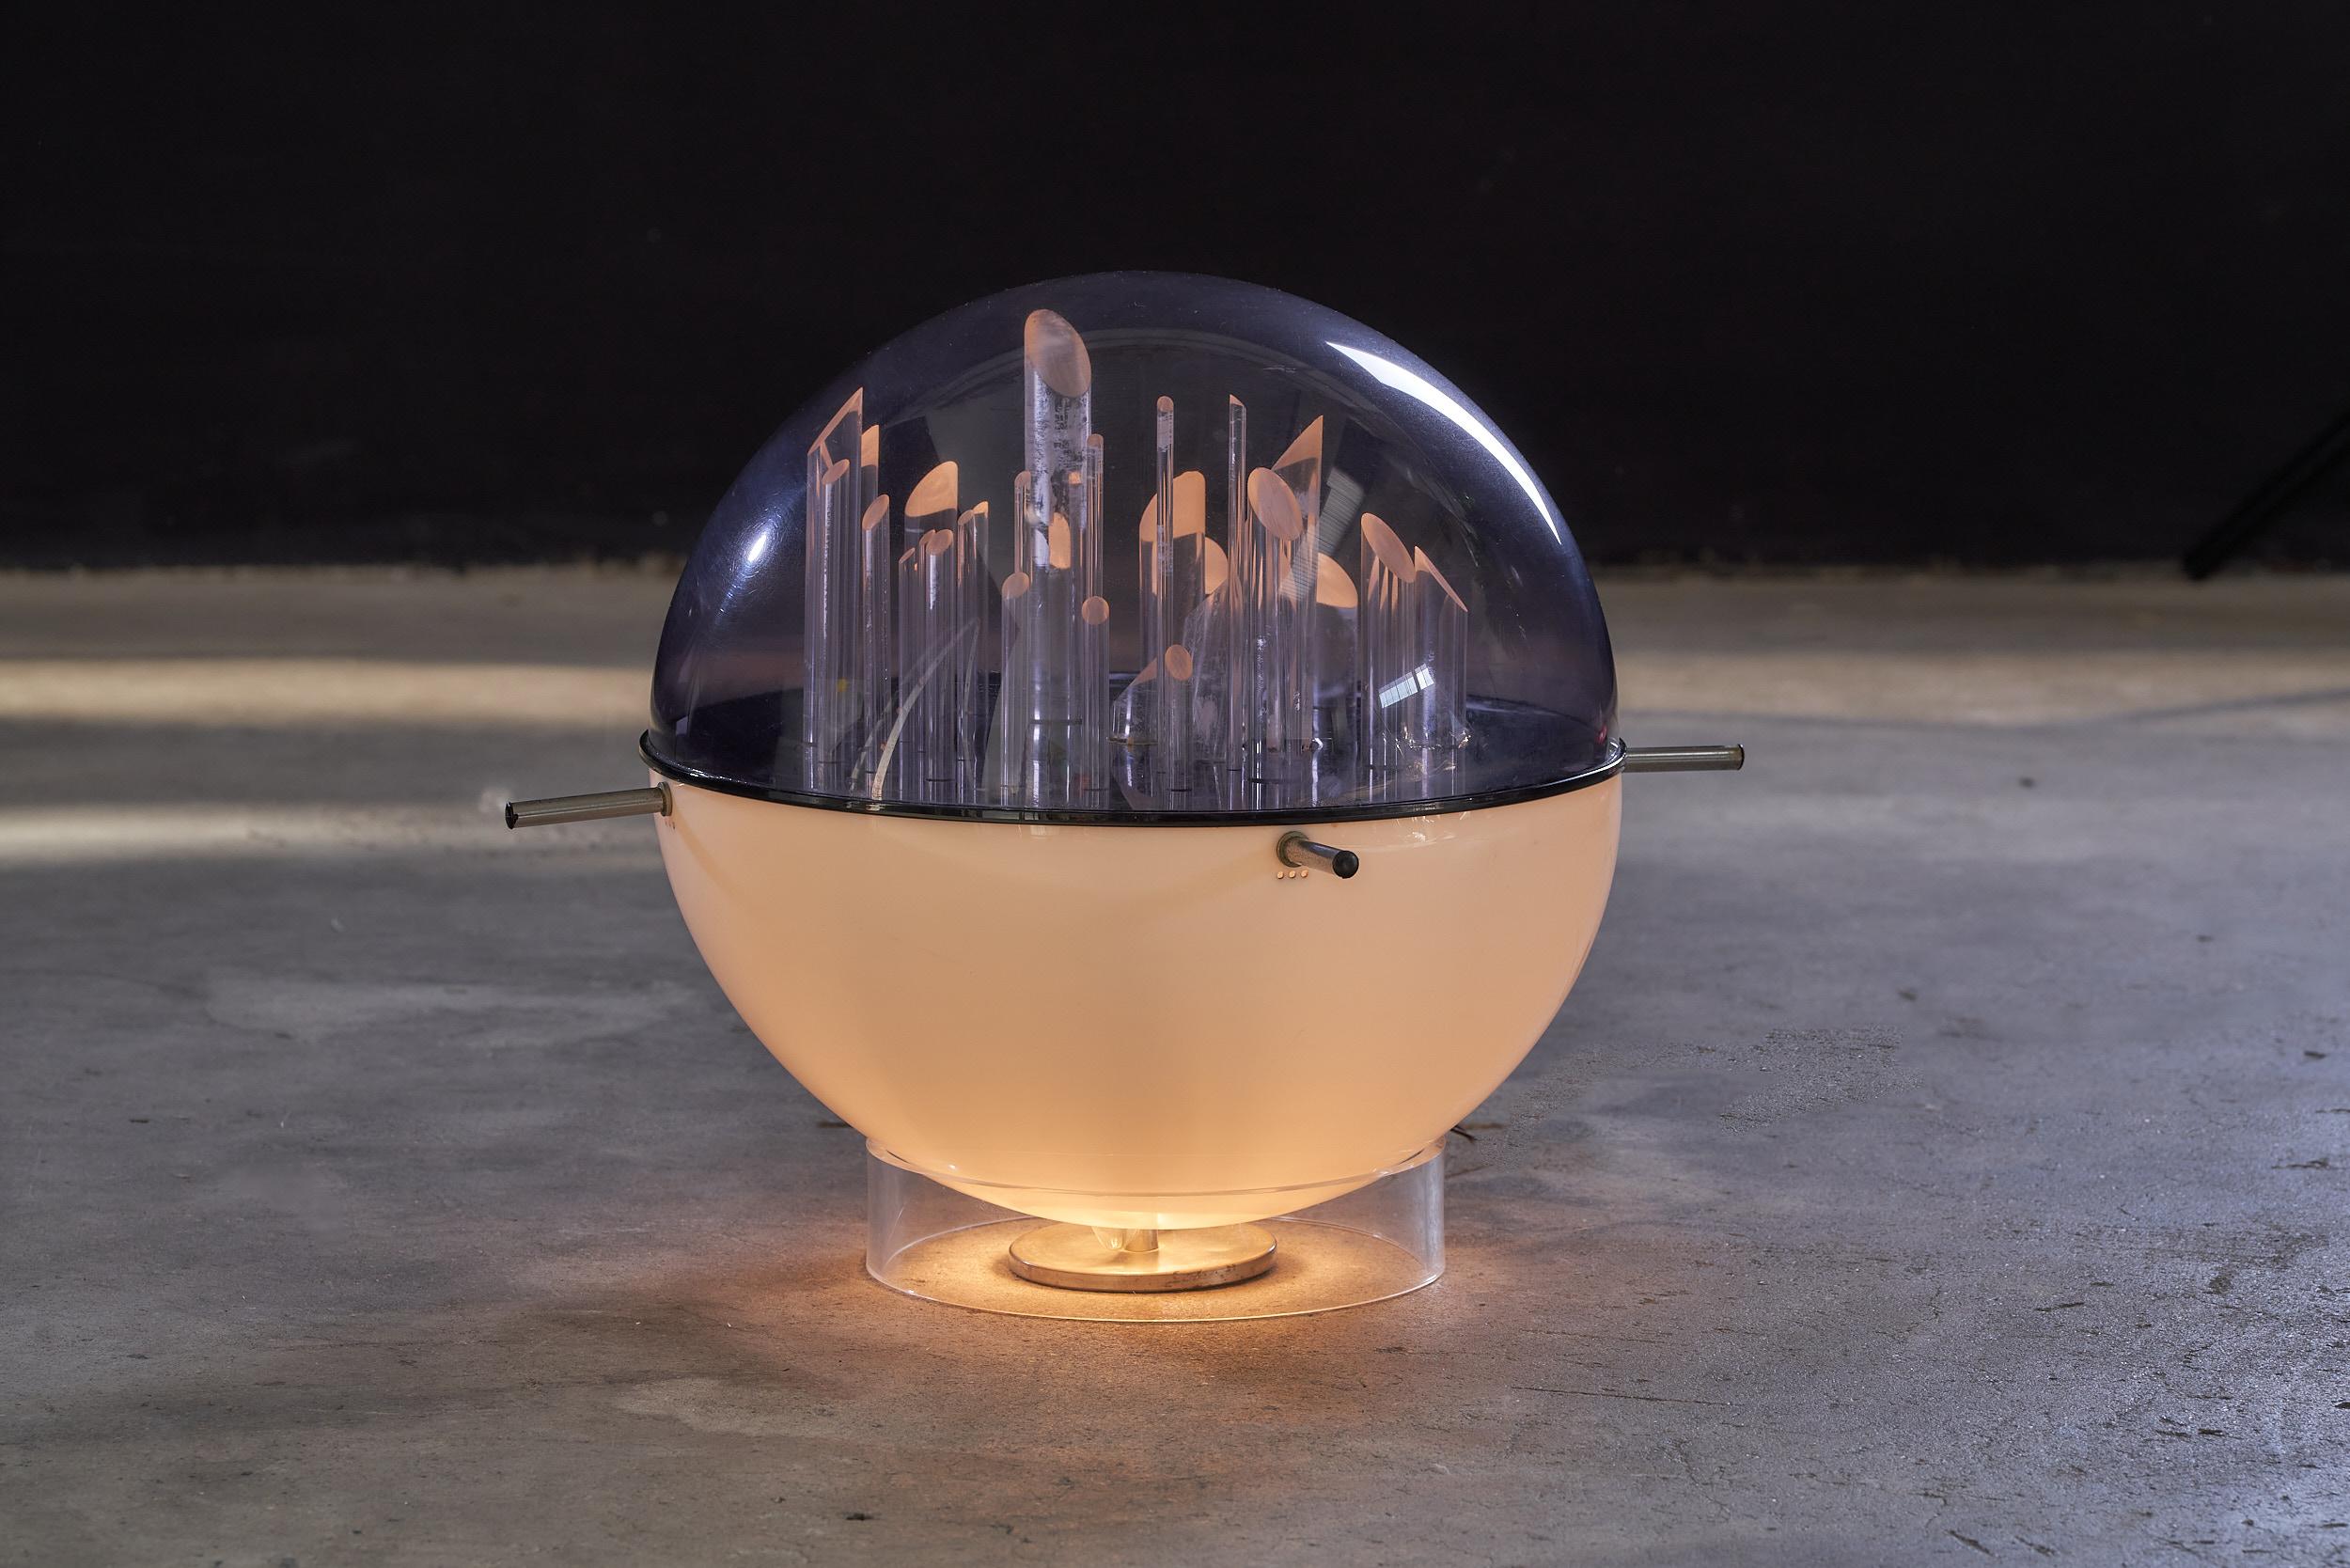 The Italian Space Age acrylic glass sculptural lamp by Gaetano Missaglia, from the 1970s, is a stunning piece of lighting design that captures the essence of the Space Age era. Created by the celebrated Italian designer, Gaetano Missaglia, this lamp